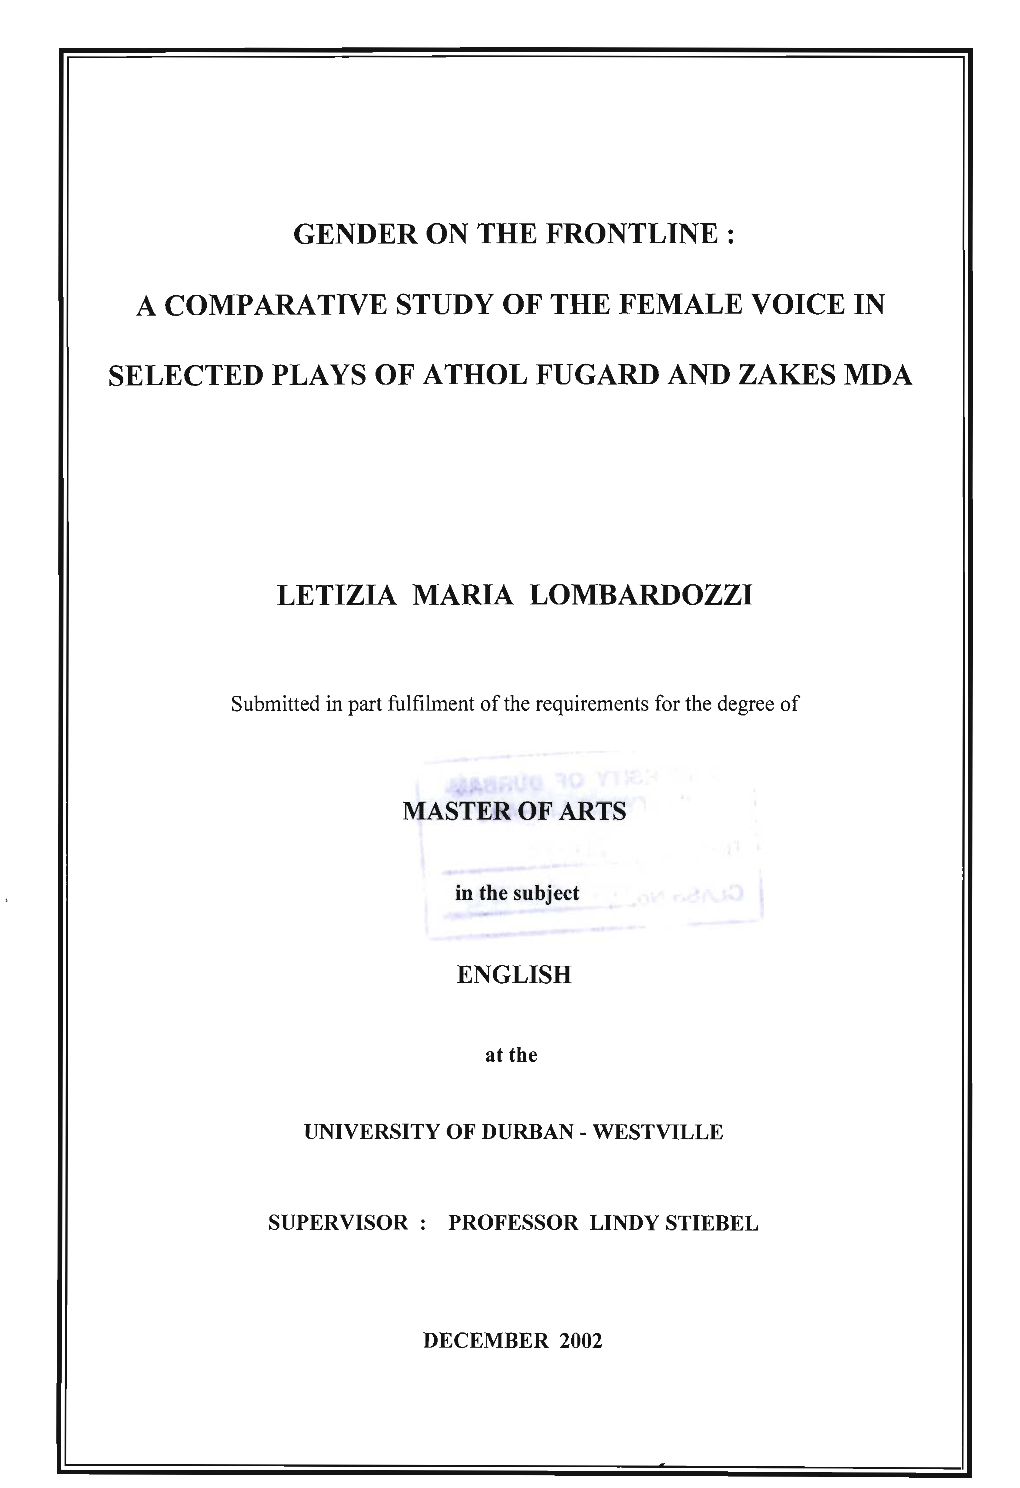 A Comparative Study of the Female Voice in Selected Plays of Athol